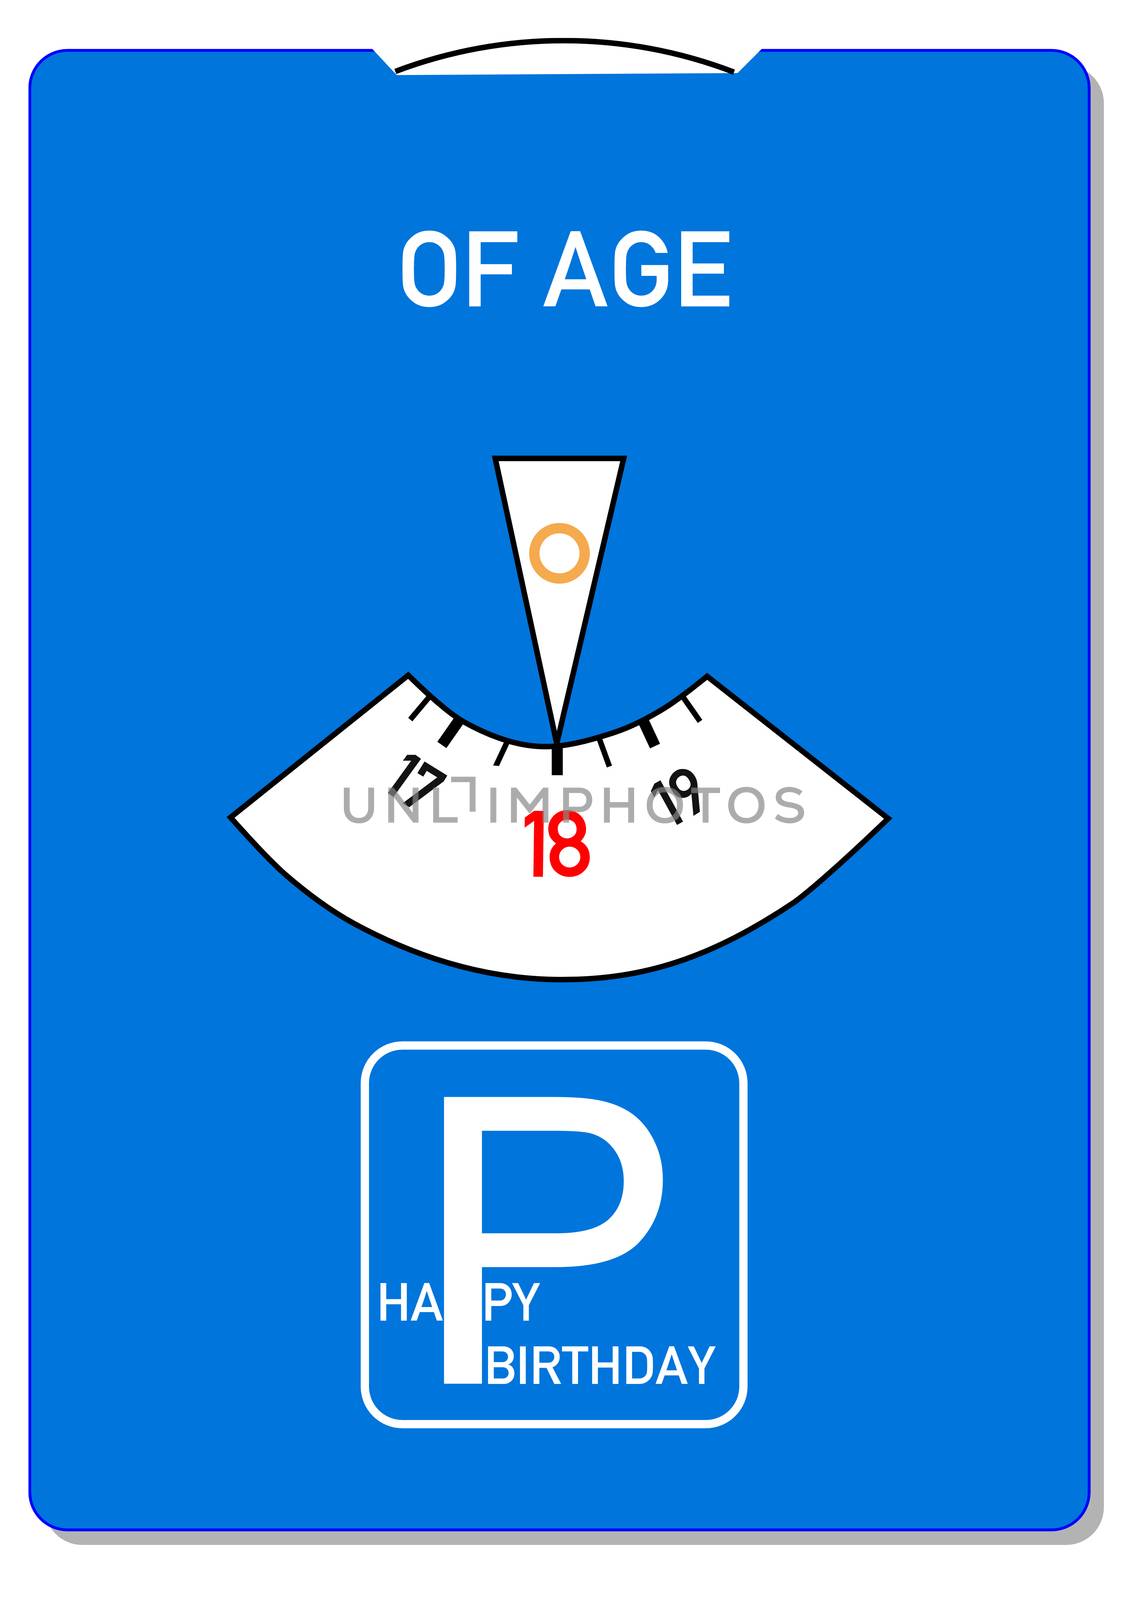 Birthday card for 18th birthday with the word of age